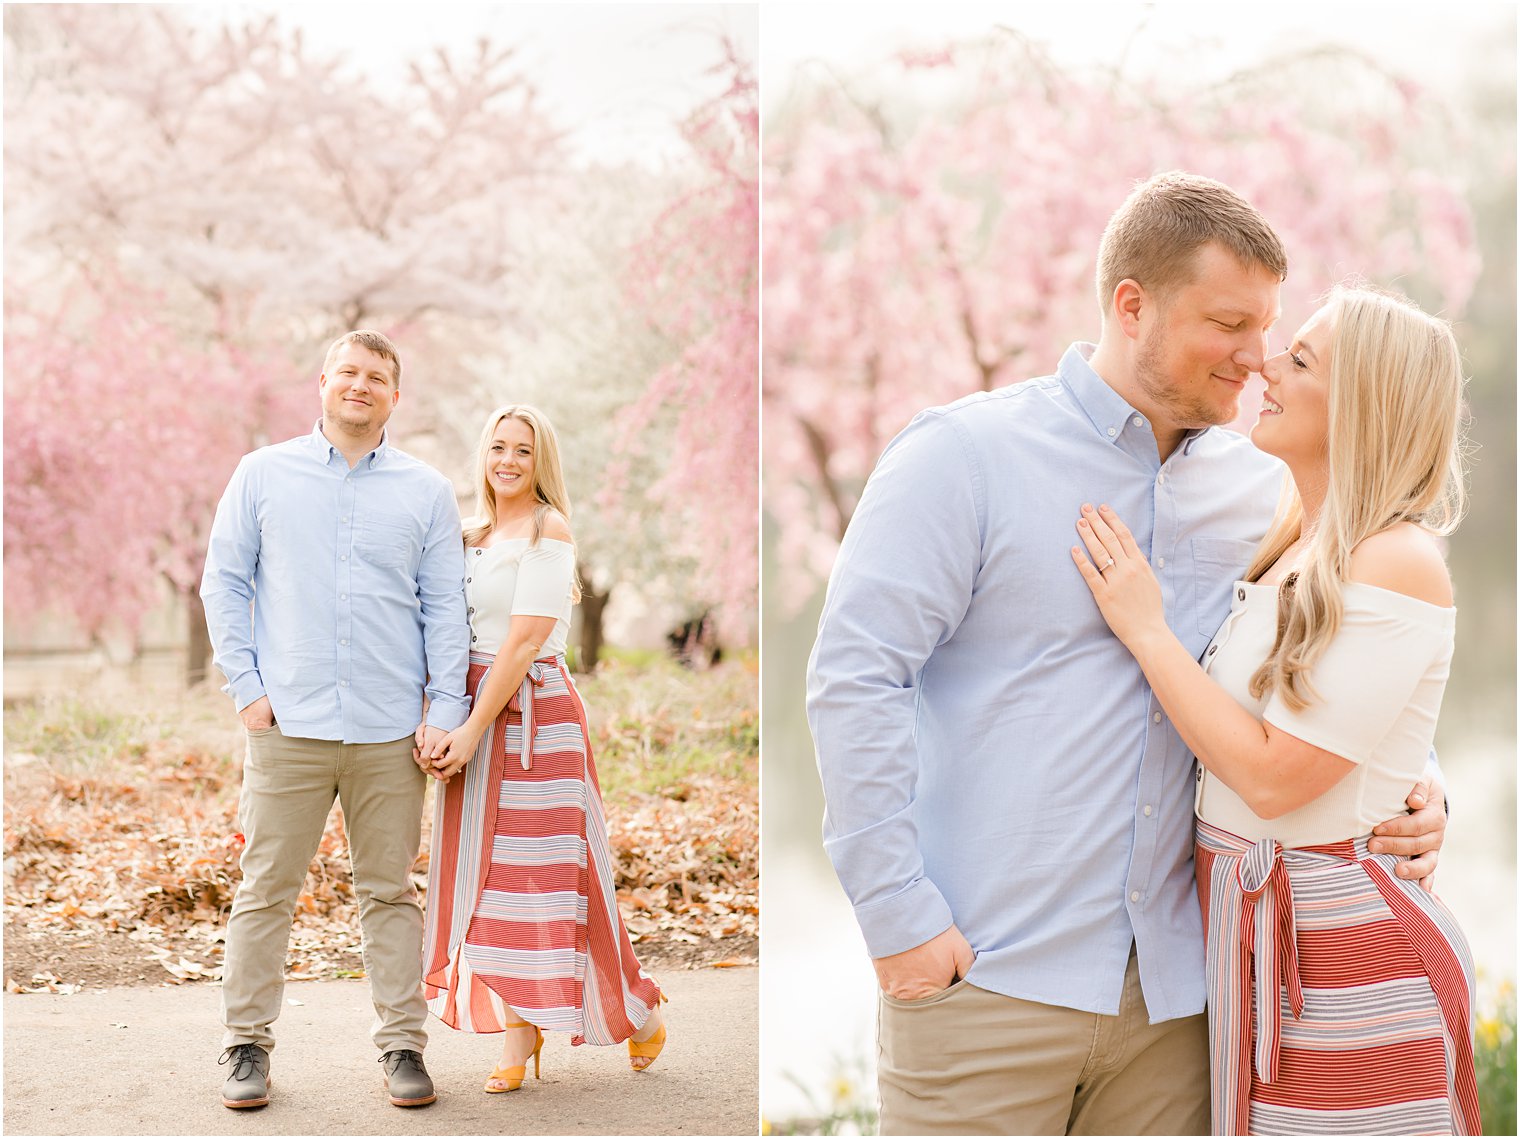 Couple posing for engagement photos | Spring Cherry Blossom Engagement